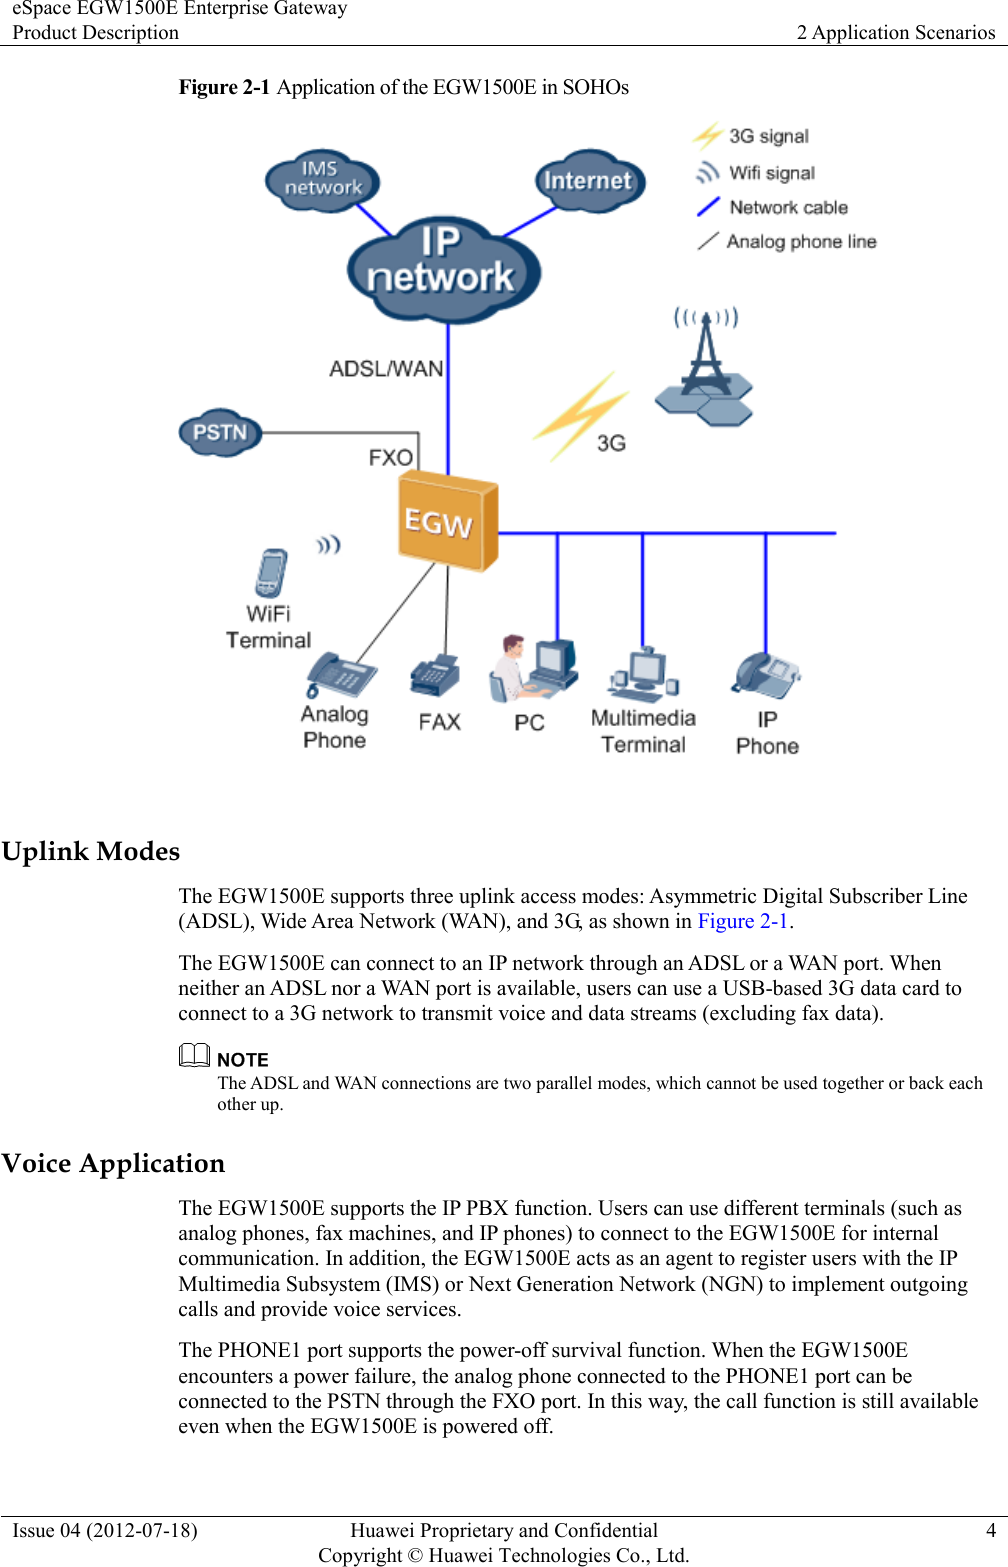 eSpace EGW1500E Enterprise Gateway Product Description 2 Application Scenarios  Issue 04 (2012-07-18) Huawei Proprietary and Confidential                                     Copyright © Huawei Technologies Co., Ltd. 4  Figure 2-1 Application of the EGW1500E in SOHOs   Uplink Modes The EGW1500E supports three uplink access modes: Asymmetric Digital Subscriber Line (ADSL), Wide Area Network (WAN), and 3G, as shown in Figure 2-1. The EGW1500E can connect to an IP network through an ADSL or a WAN port. When neither an ADSL nor a WAN port is available, users can use a USB-based 3G data card to connect to a 3G network to transmit voice and data streams (excluding fax data).  The ADSL and WAN connections are two parallel modes, which cannot be used together or back each other up. Voice Application The EGW1500E supports the IP PBX function. Users can use different terminals (such as analog phones, fax machines, and IP phones) to connect to the EGW1500E for internal communication. In addition, the EGW1500E acts as an agent to register users with the IP Multimedia Subsystem (IMS) or Next Generation Network (NGN) to implement outgoing calls and provide voice services. The PHONE1 port supports the power-off survival function. When the EGW1500E encounters a power failure, the analog phone connected to the PHONE1 port can be connected to the PSTN through the FXO port. In this way, the call function is still available even when the EGW1500E is powered off. 